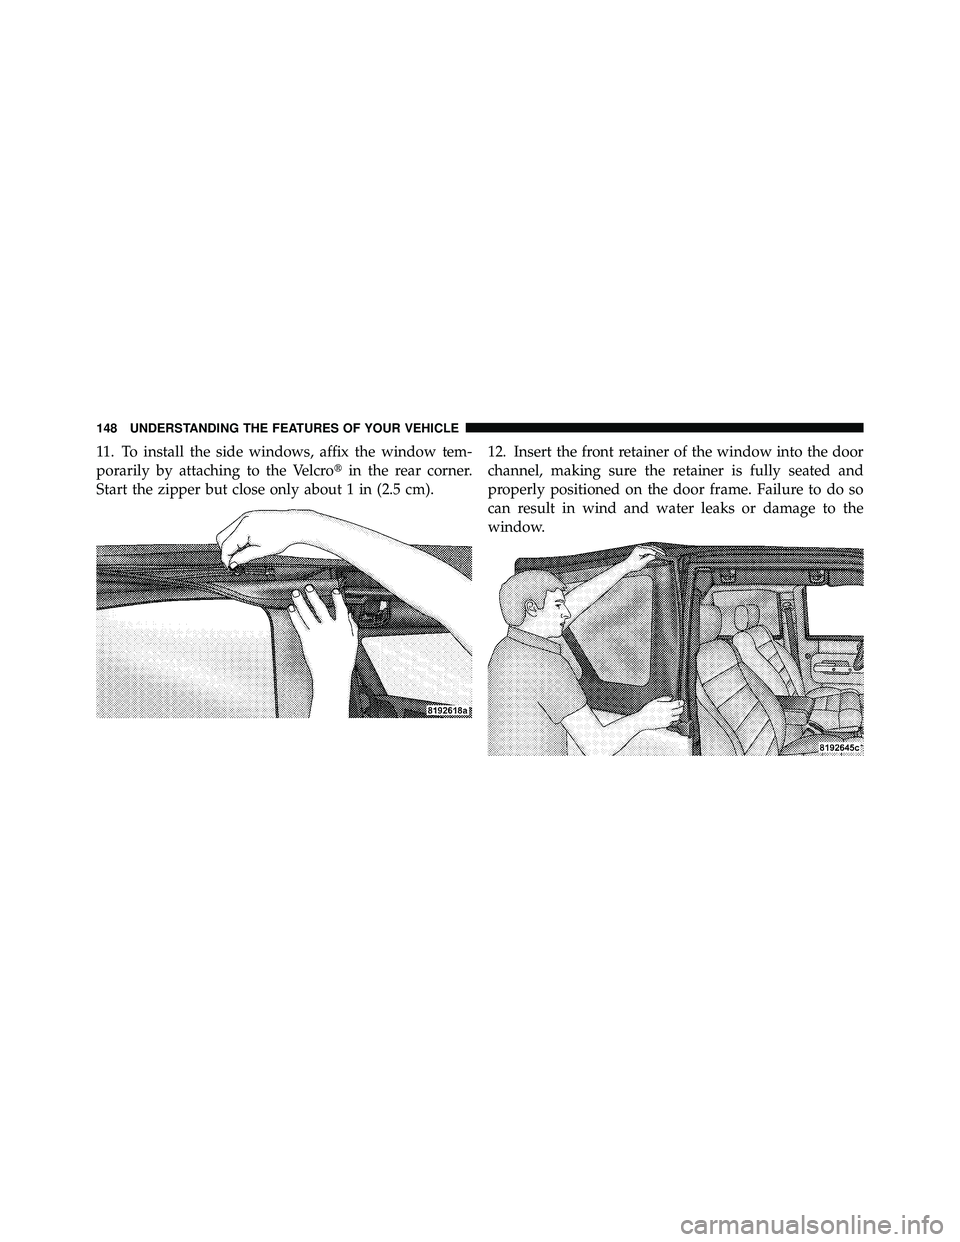 JEEP WRANGLER 2009  Owners Manual 11. To install the side windows, affix the window tem-
porarily by attaching to the Velcroin the rear corner.
Start the zipper but close only about 1 in (2.5 cm). 12. Insert the front retainer of the